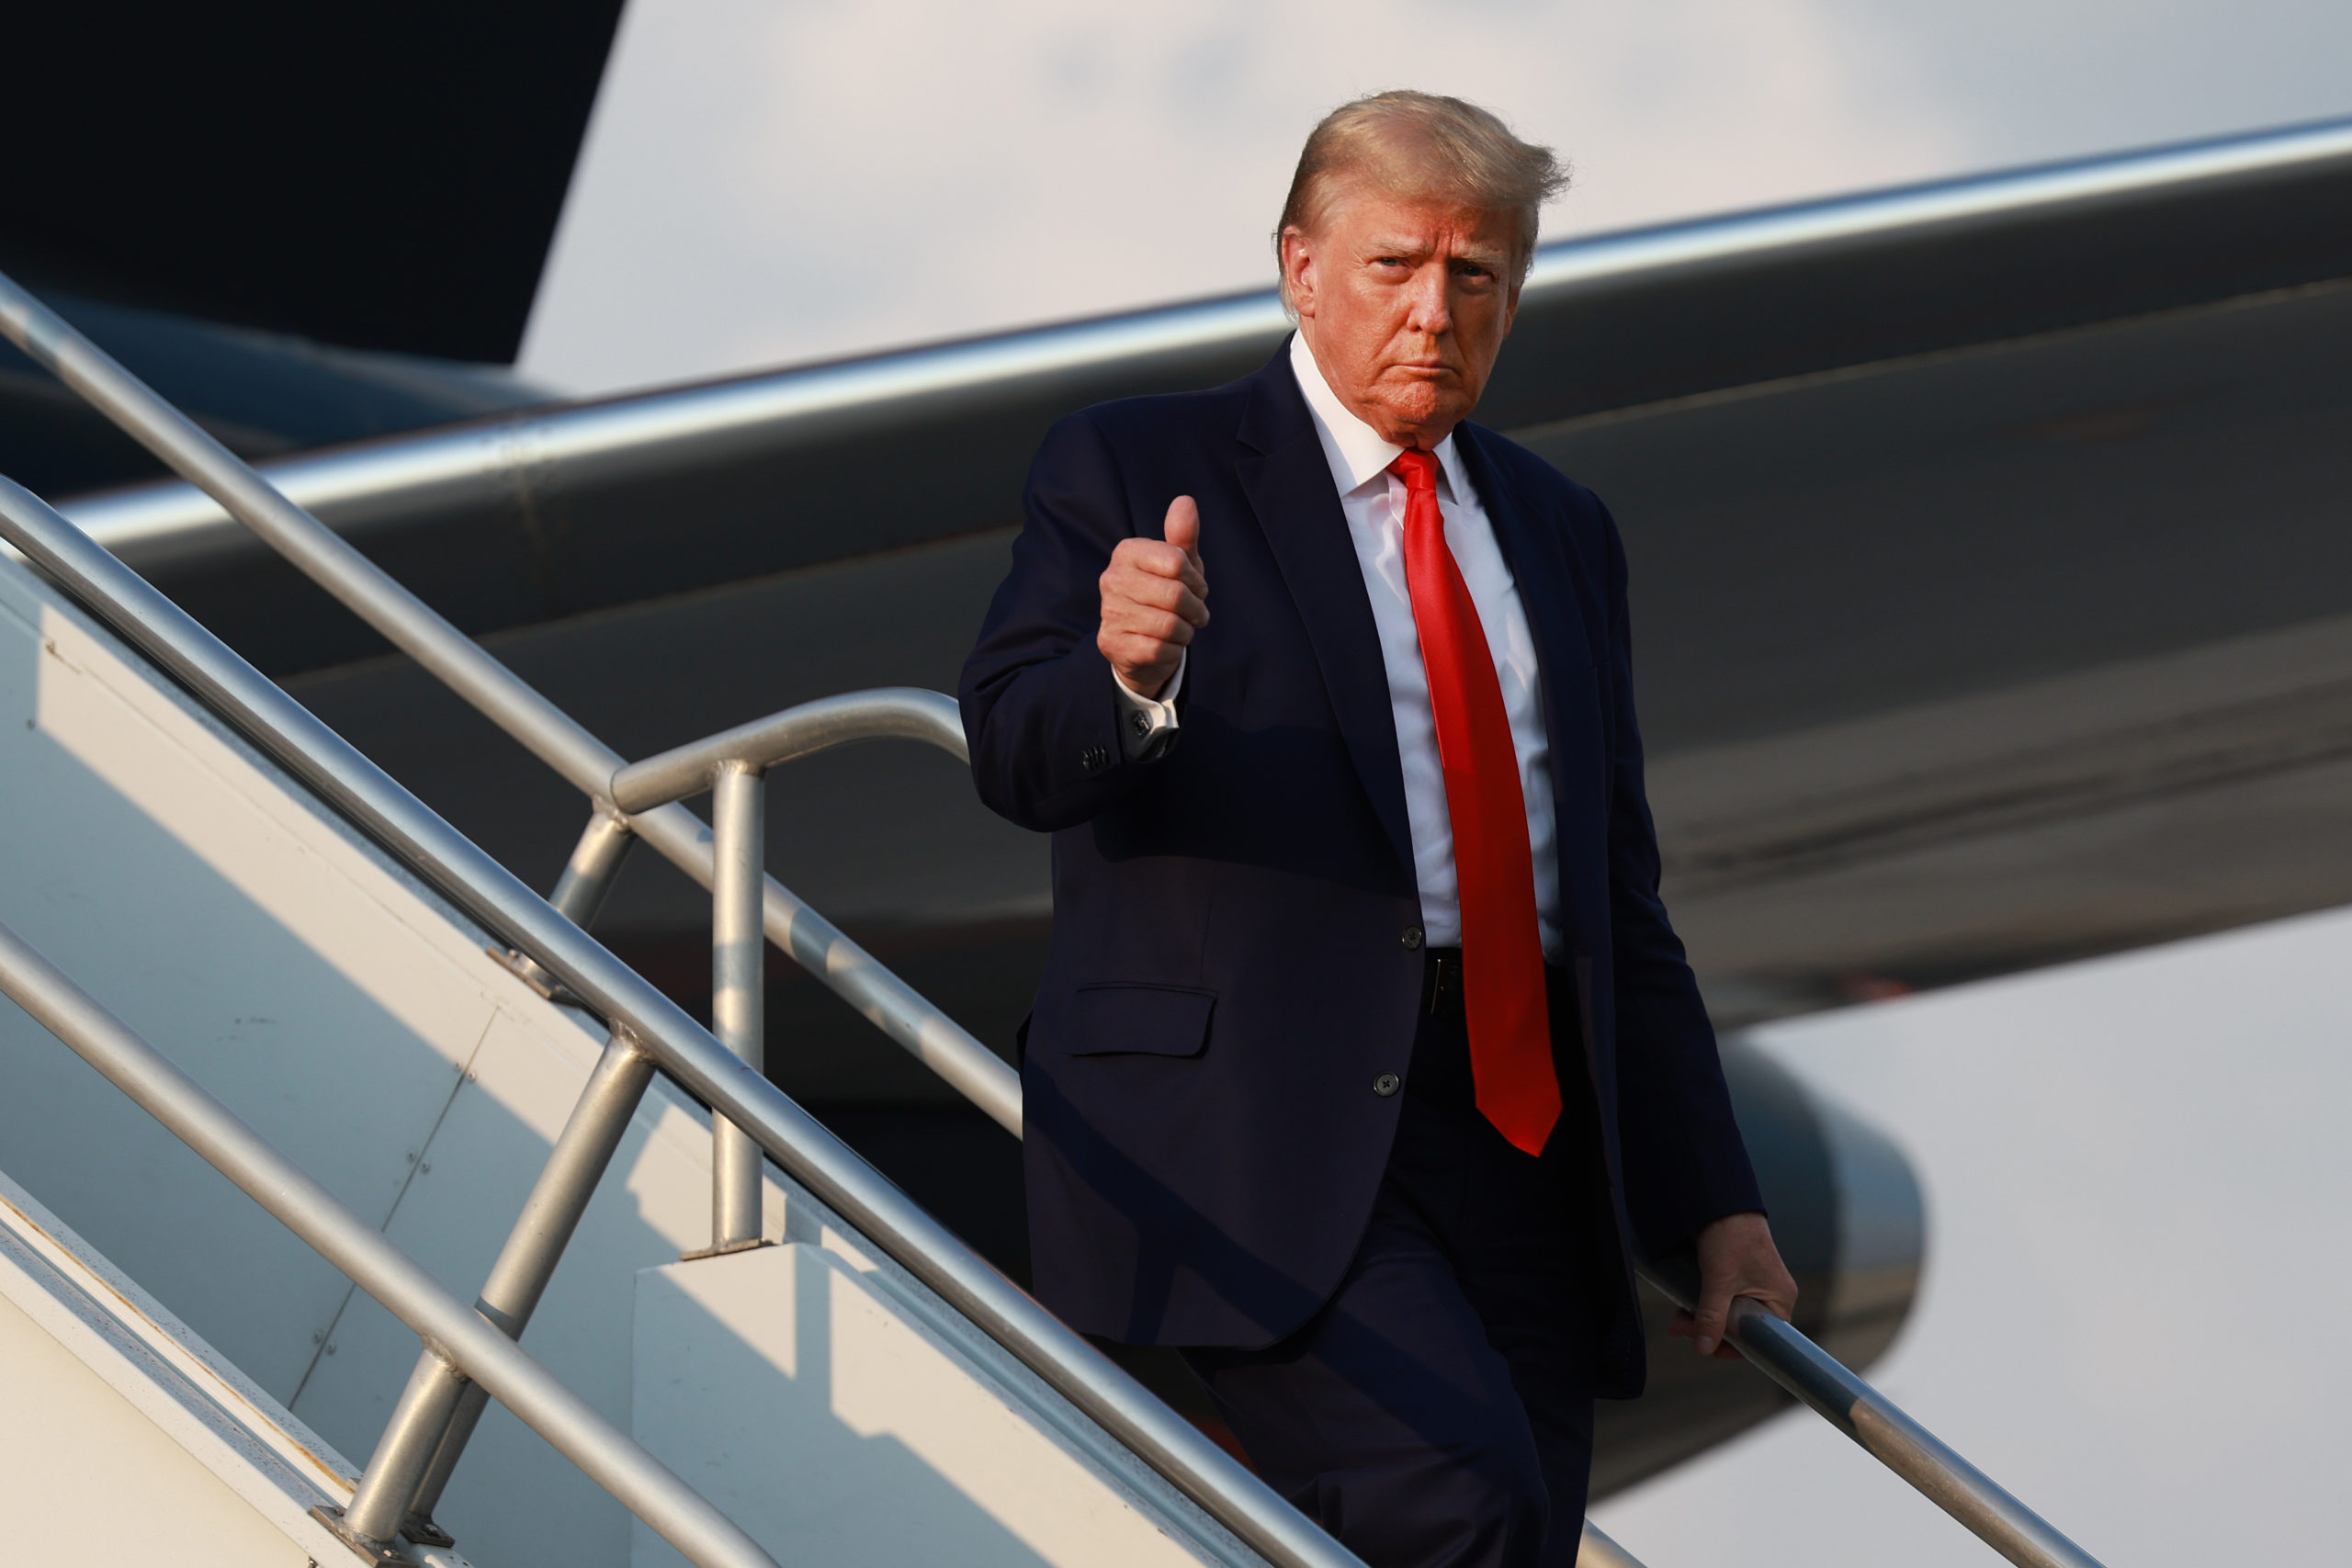 ATLANTA, GEORGIA - AUGUST 24: Former U.S. President Donald Trump gives a thumbs up as he arrives at Atlanta Hartsfield-Jackson International Airport on August 24, 2023 in Atlanta, Georgia. Trump is expected to surrender at the Fulton County jail, where he will be booked on 13 charges related to an alleged plan to overturn the results of the 2020 presidential election in Georgia. (Photo by Joe Raedle/Getty Images)